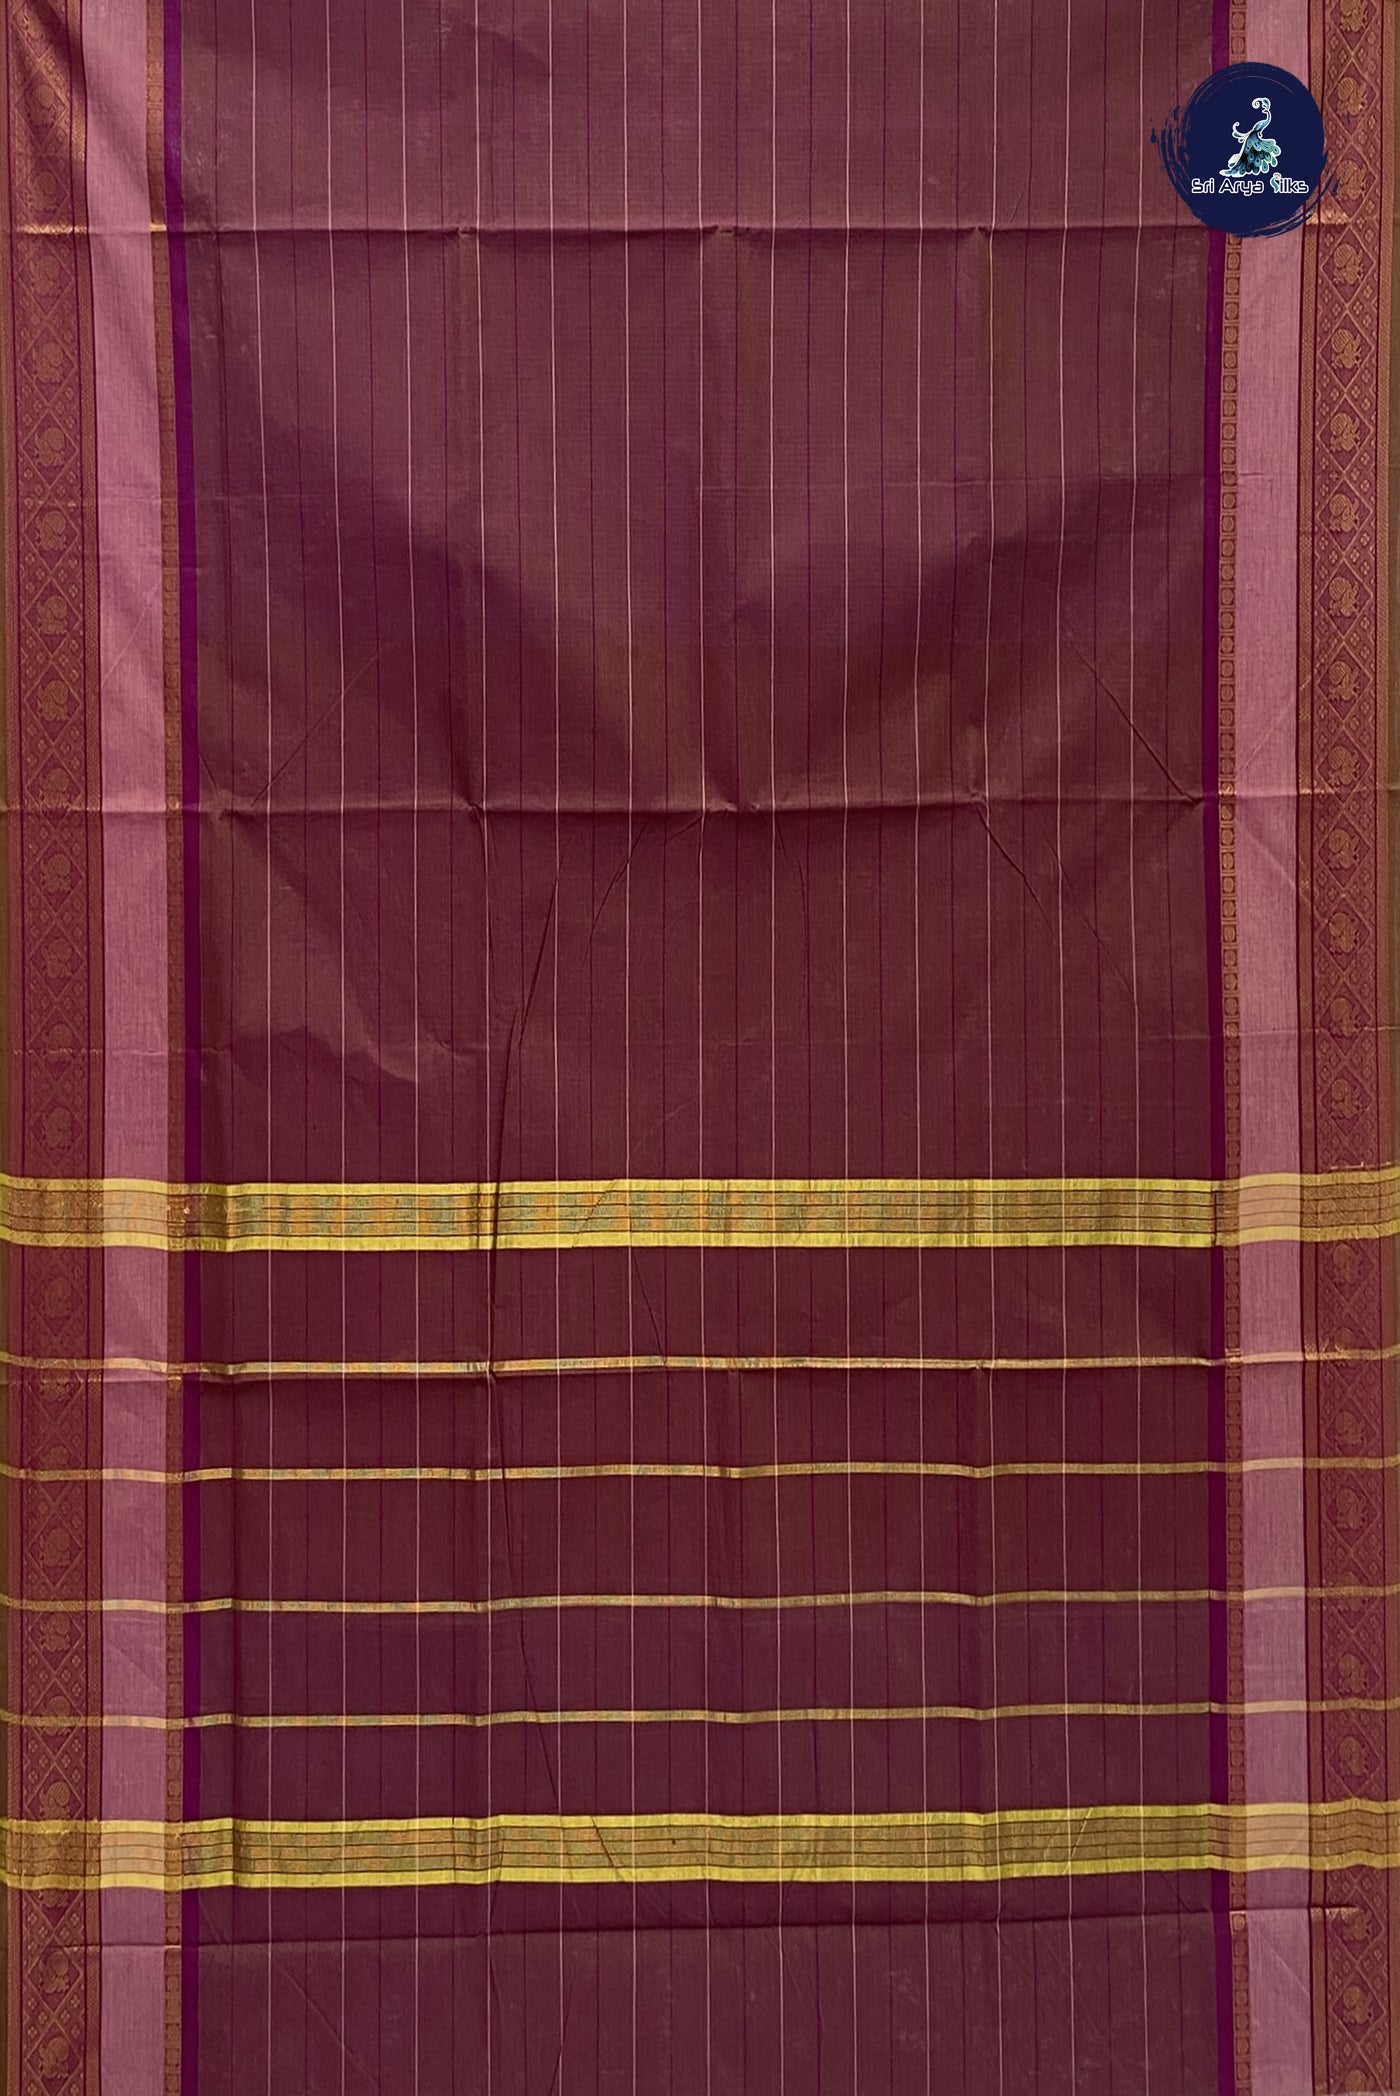 Dual Tone Brown Cotton Saree With Stripes Pattern